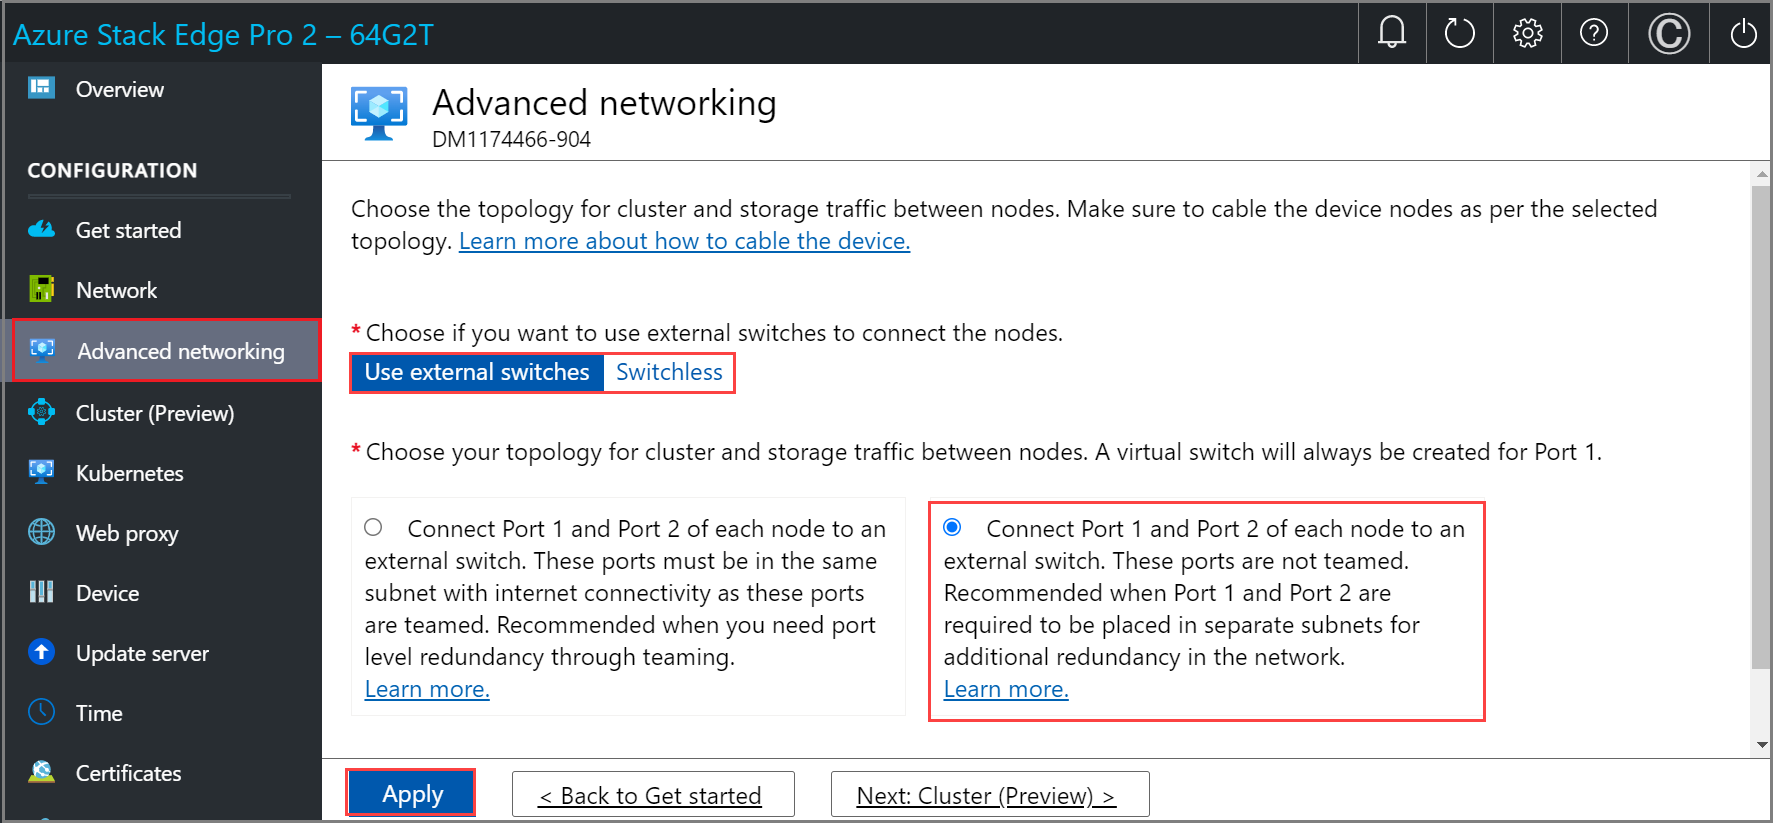 Local web UI "Advanced networking" page with "Use external switches" option selected